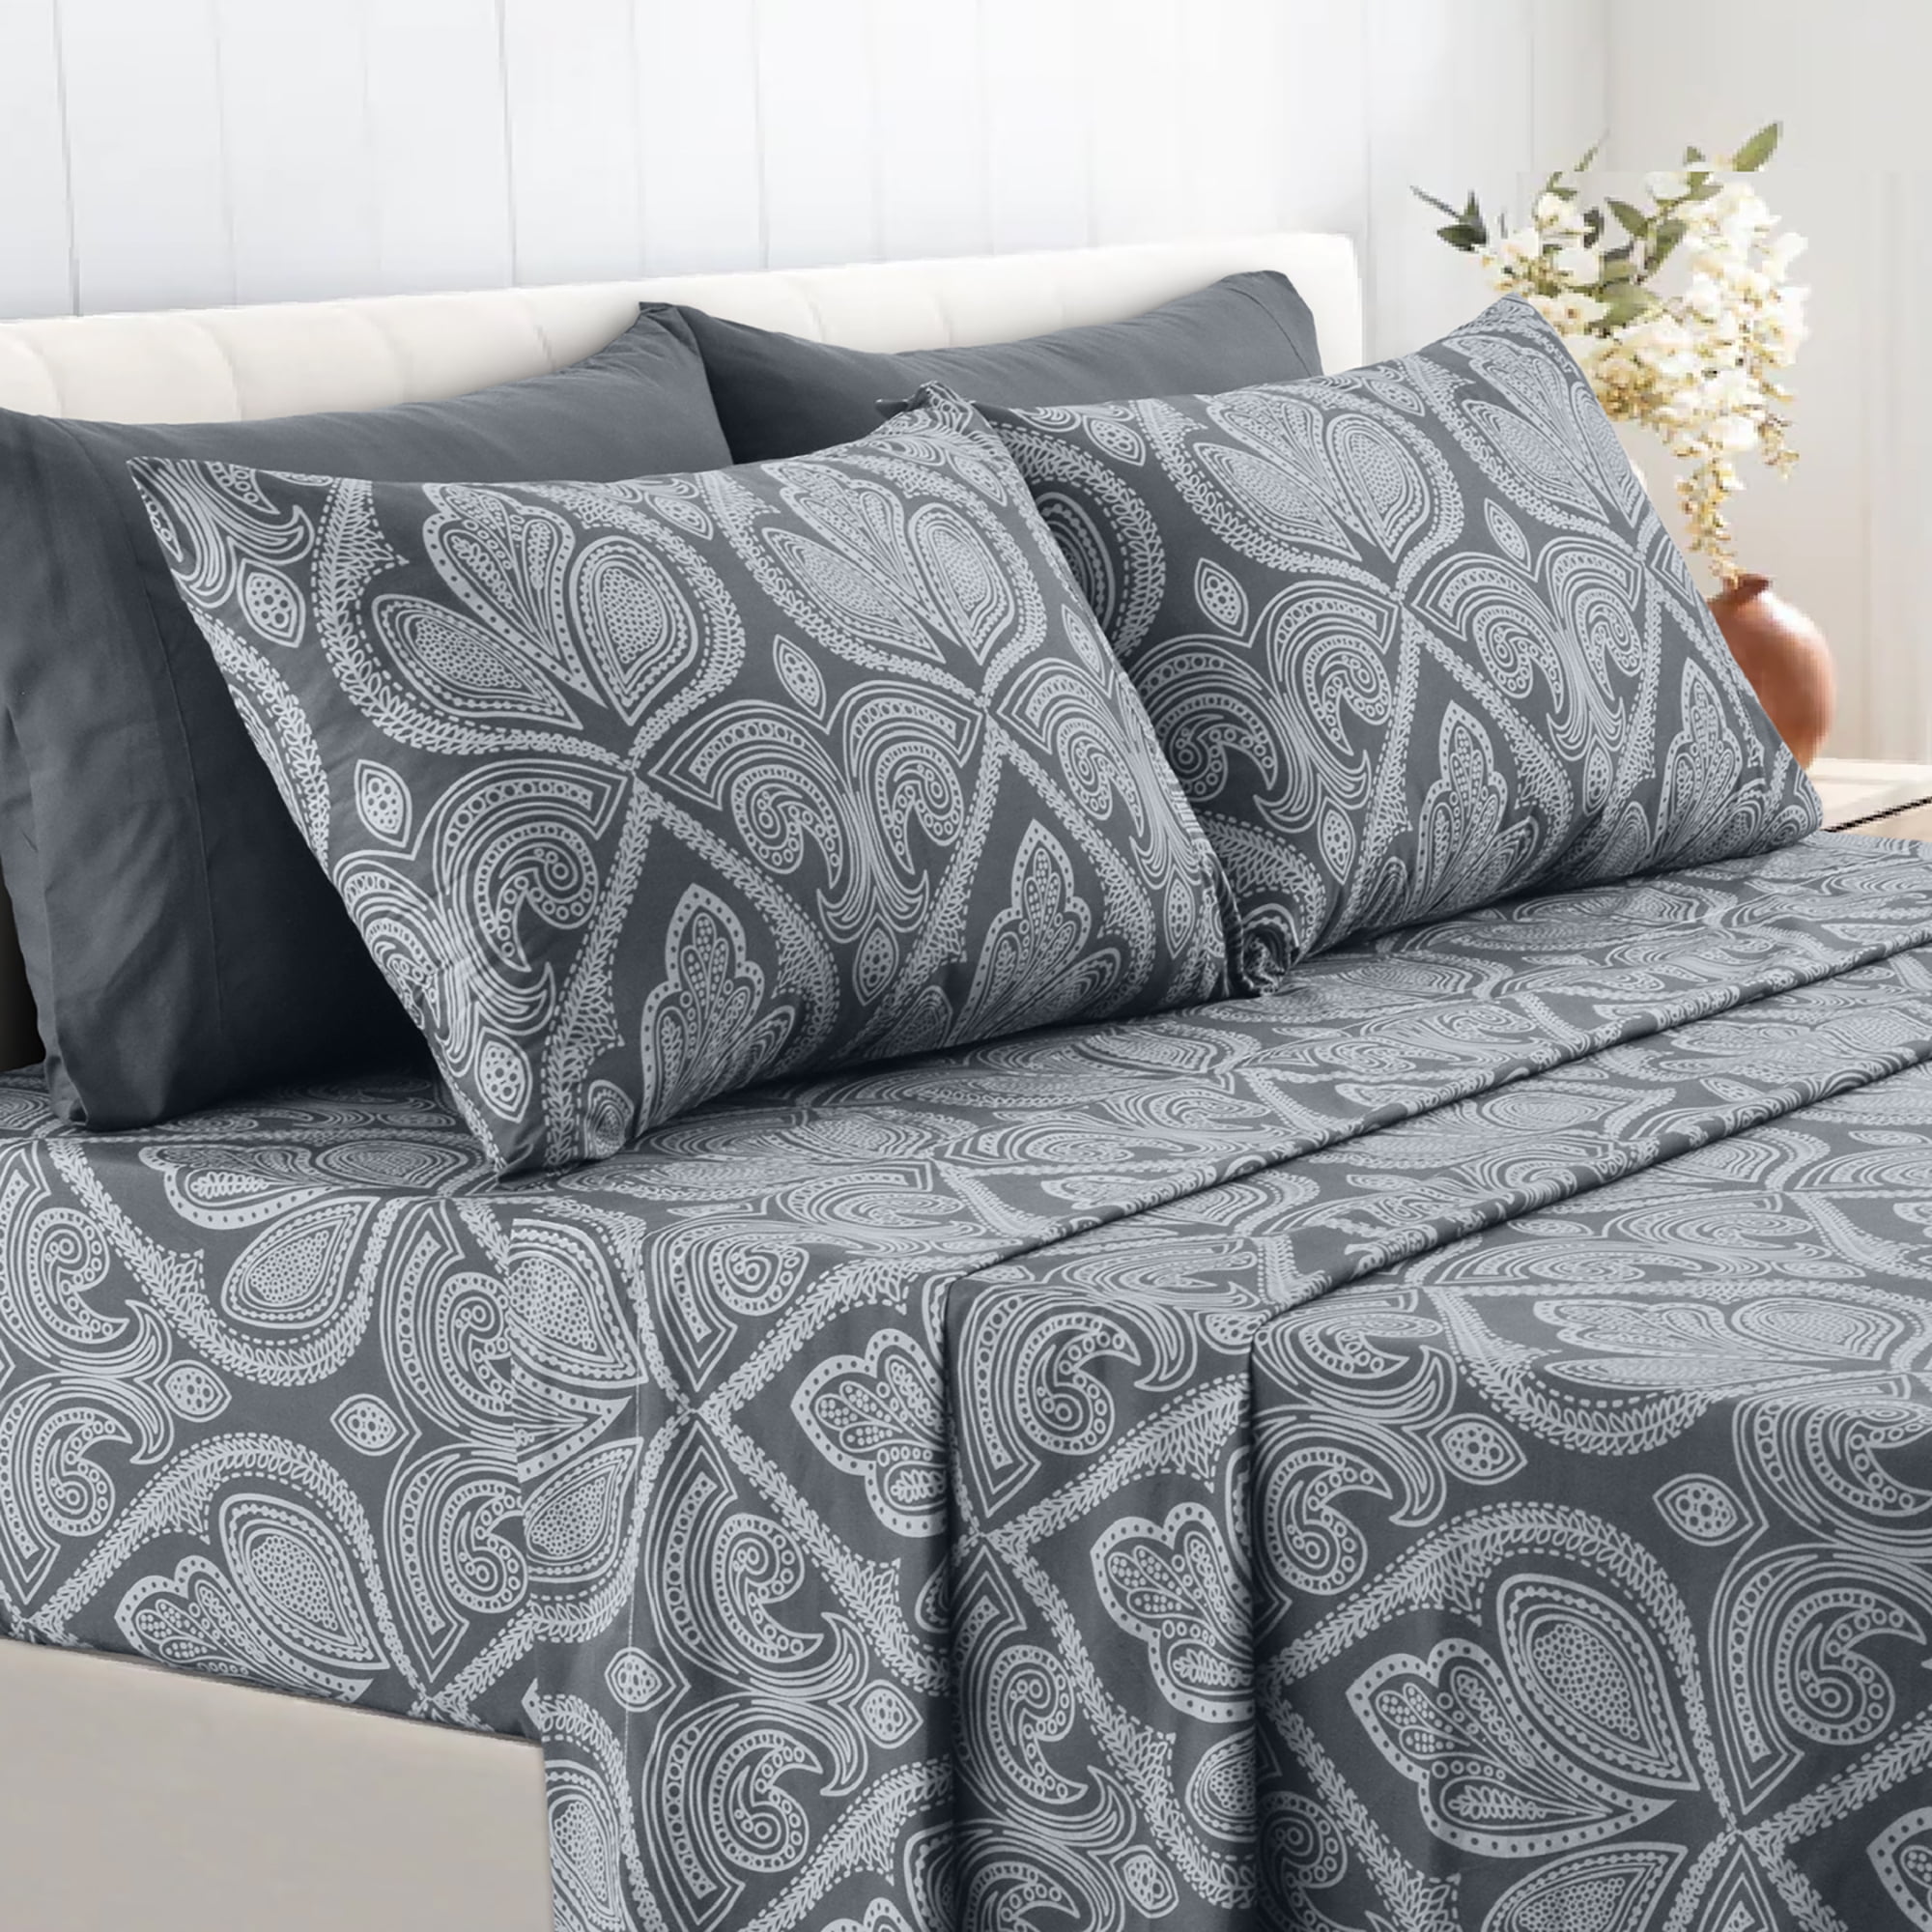 Details about   Extra Deep Wall Comfy Bedding Item 1200 Thread Count Select Item Navy Blue Solid 